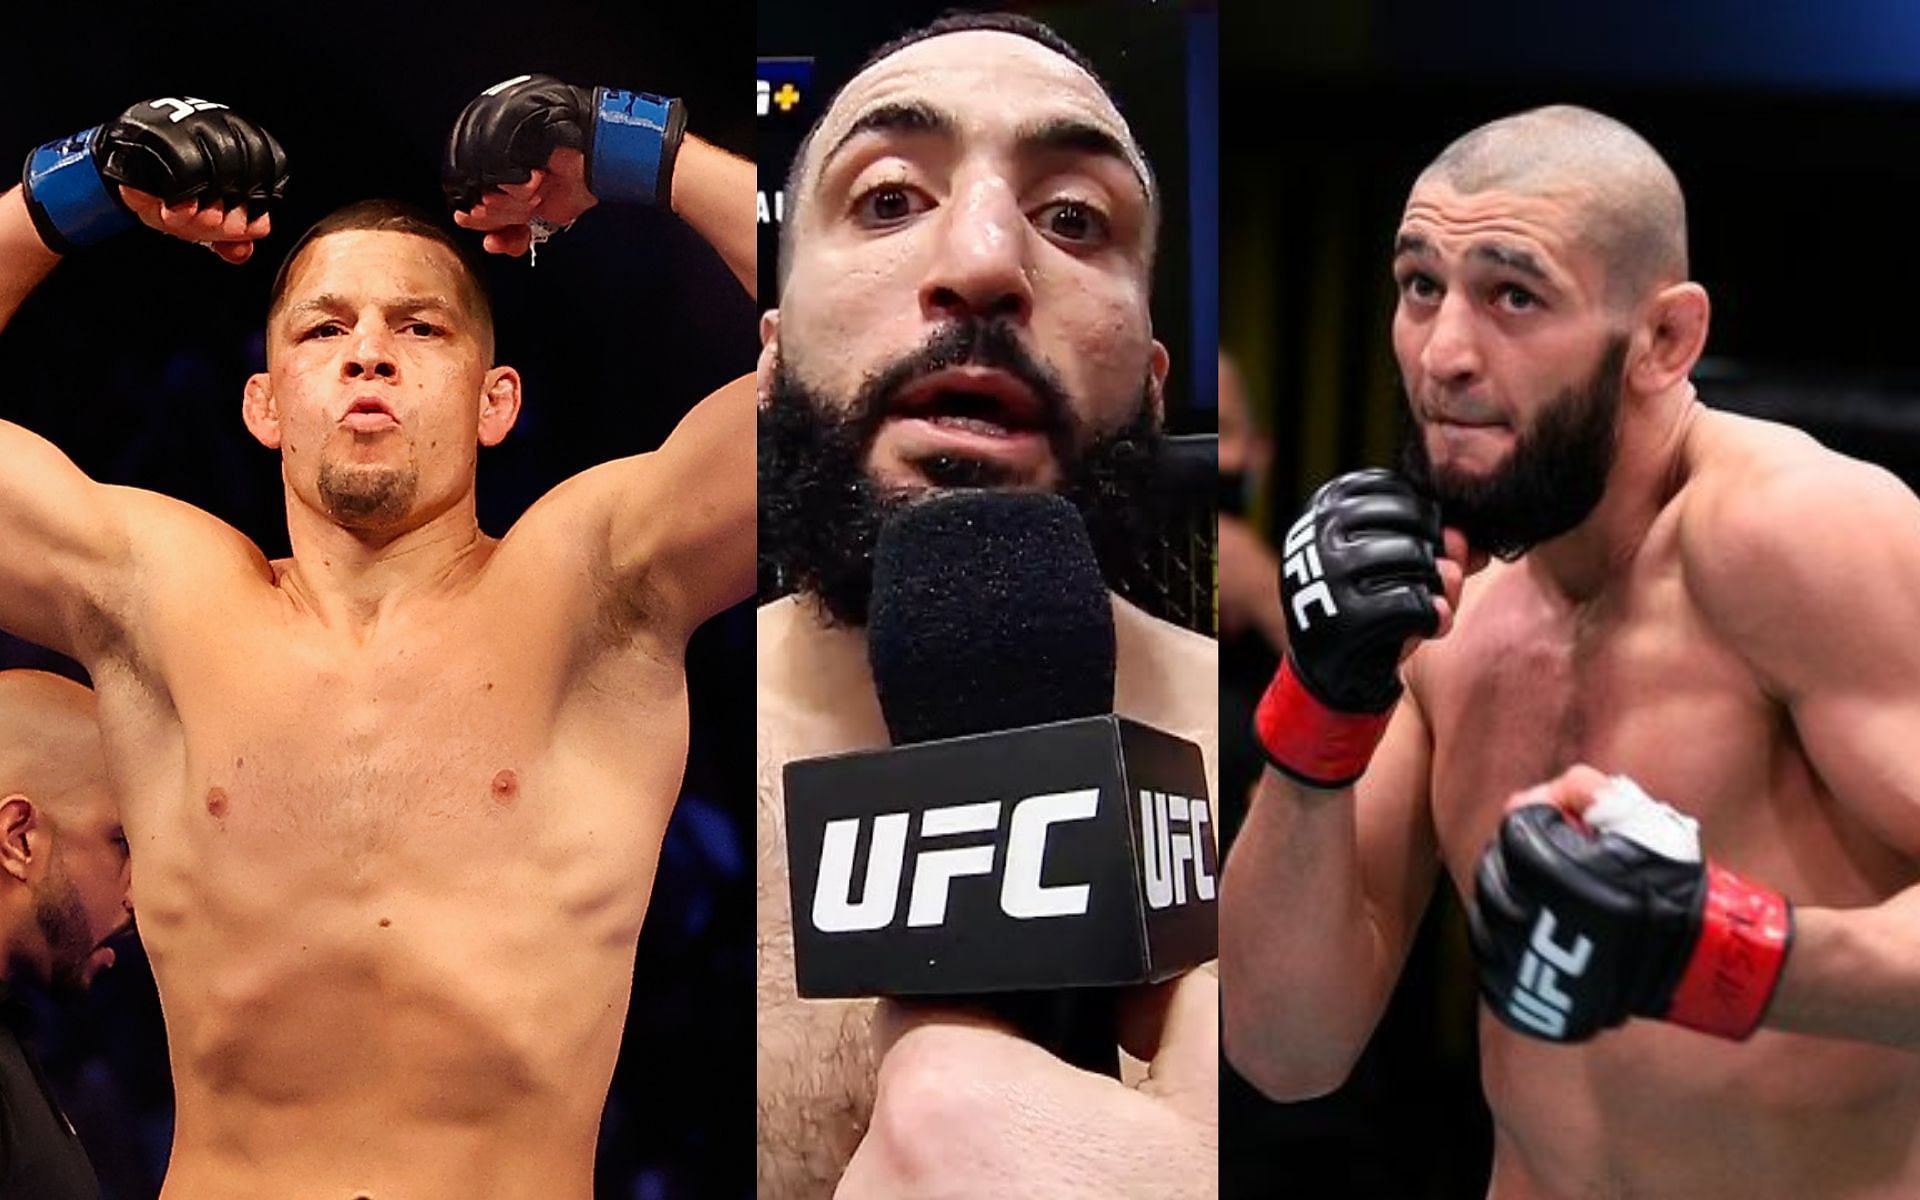 Nate Diaz (left), Belal Muhammad (center), and Khamzat Chimaev (right). [left and right images from Getty Images, center image from YouTube UFC channel]